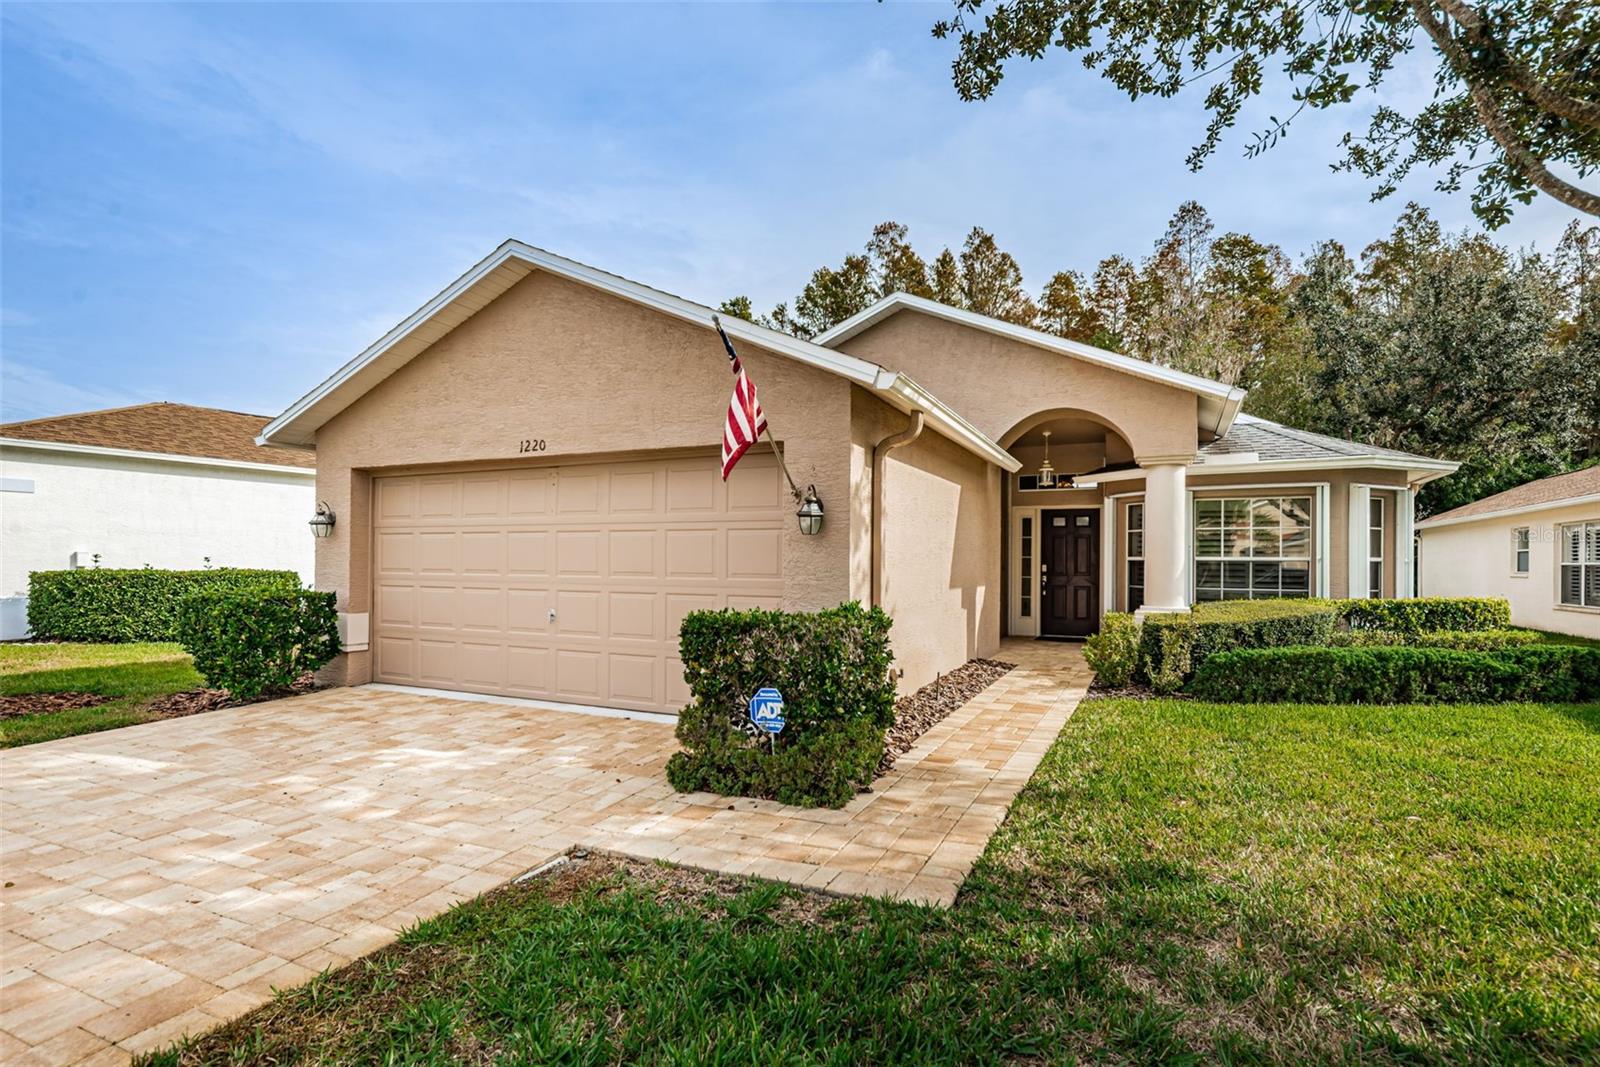 Details for 1220 Winding Willow Drive, TRINITY, FL 34655